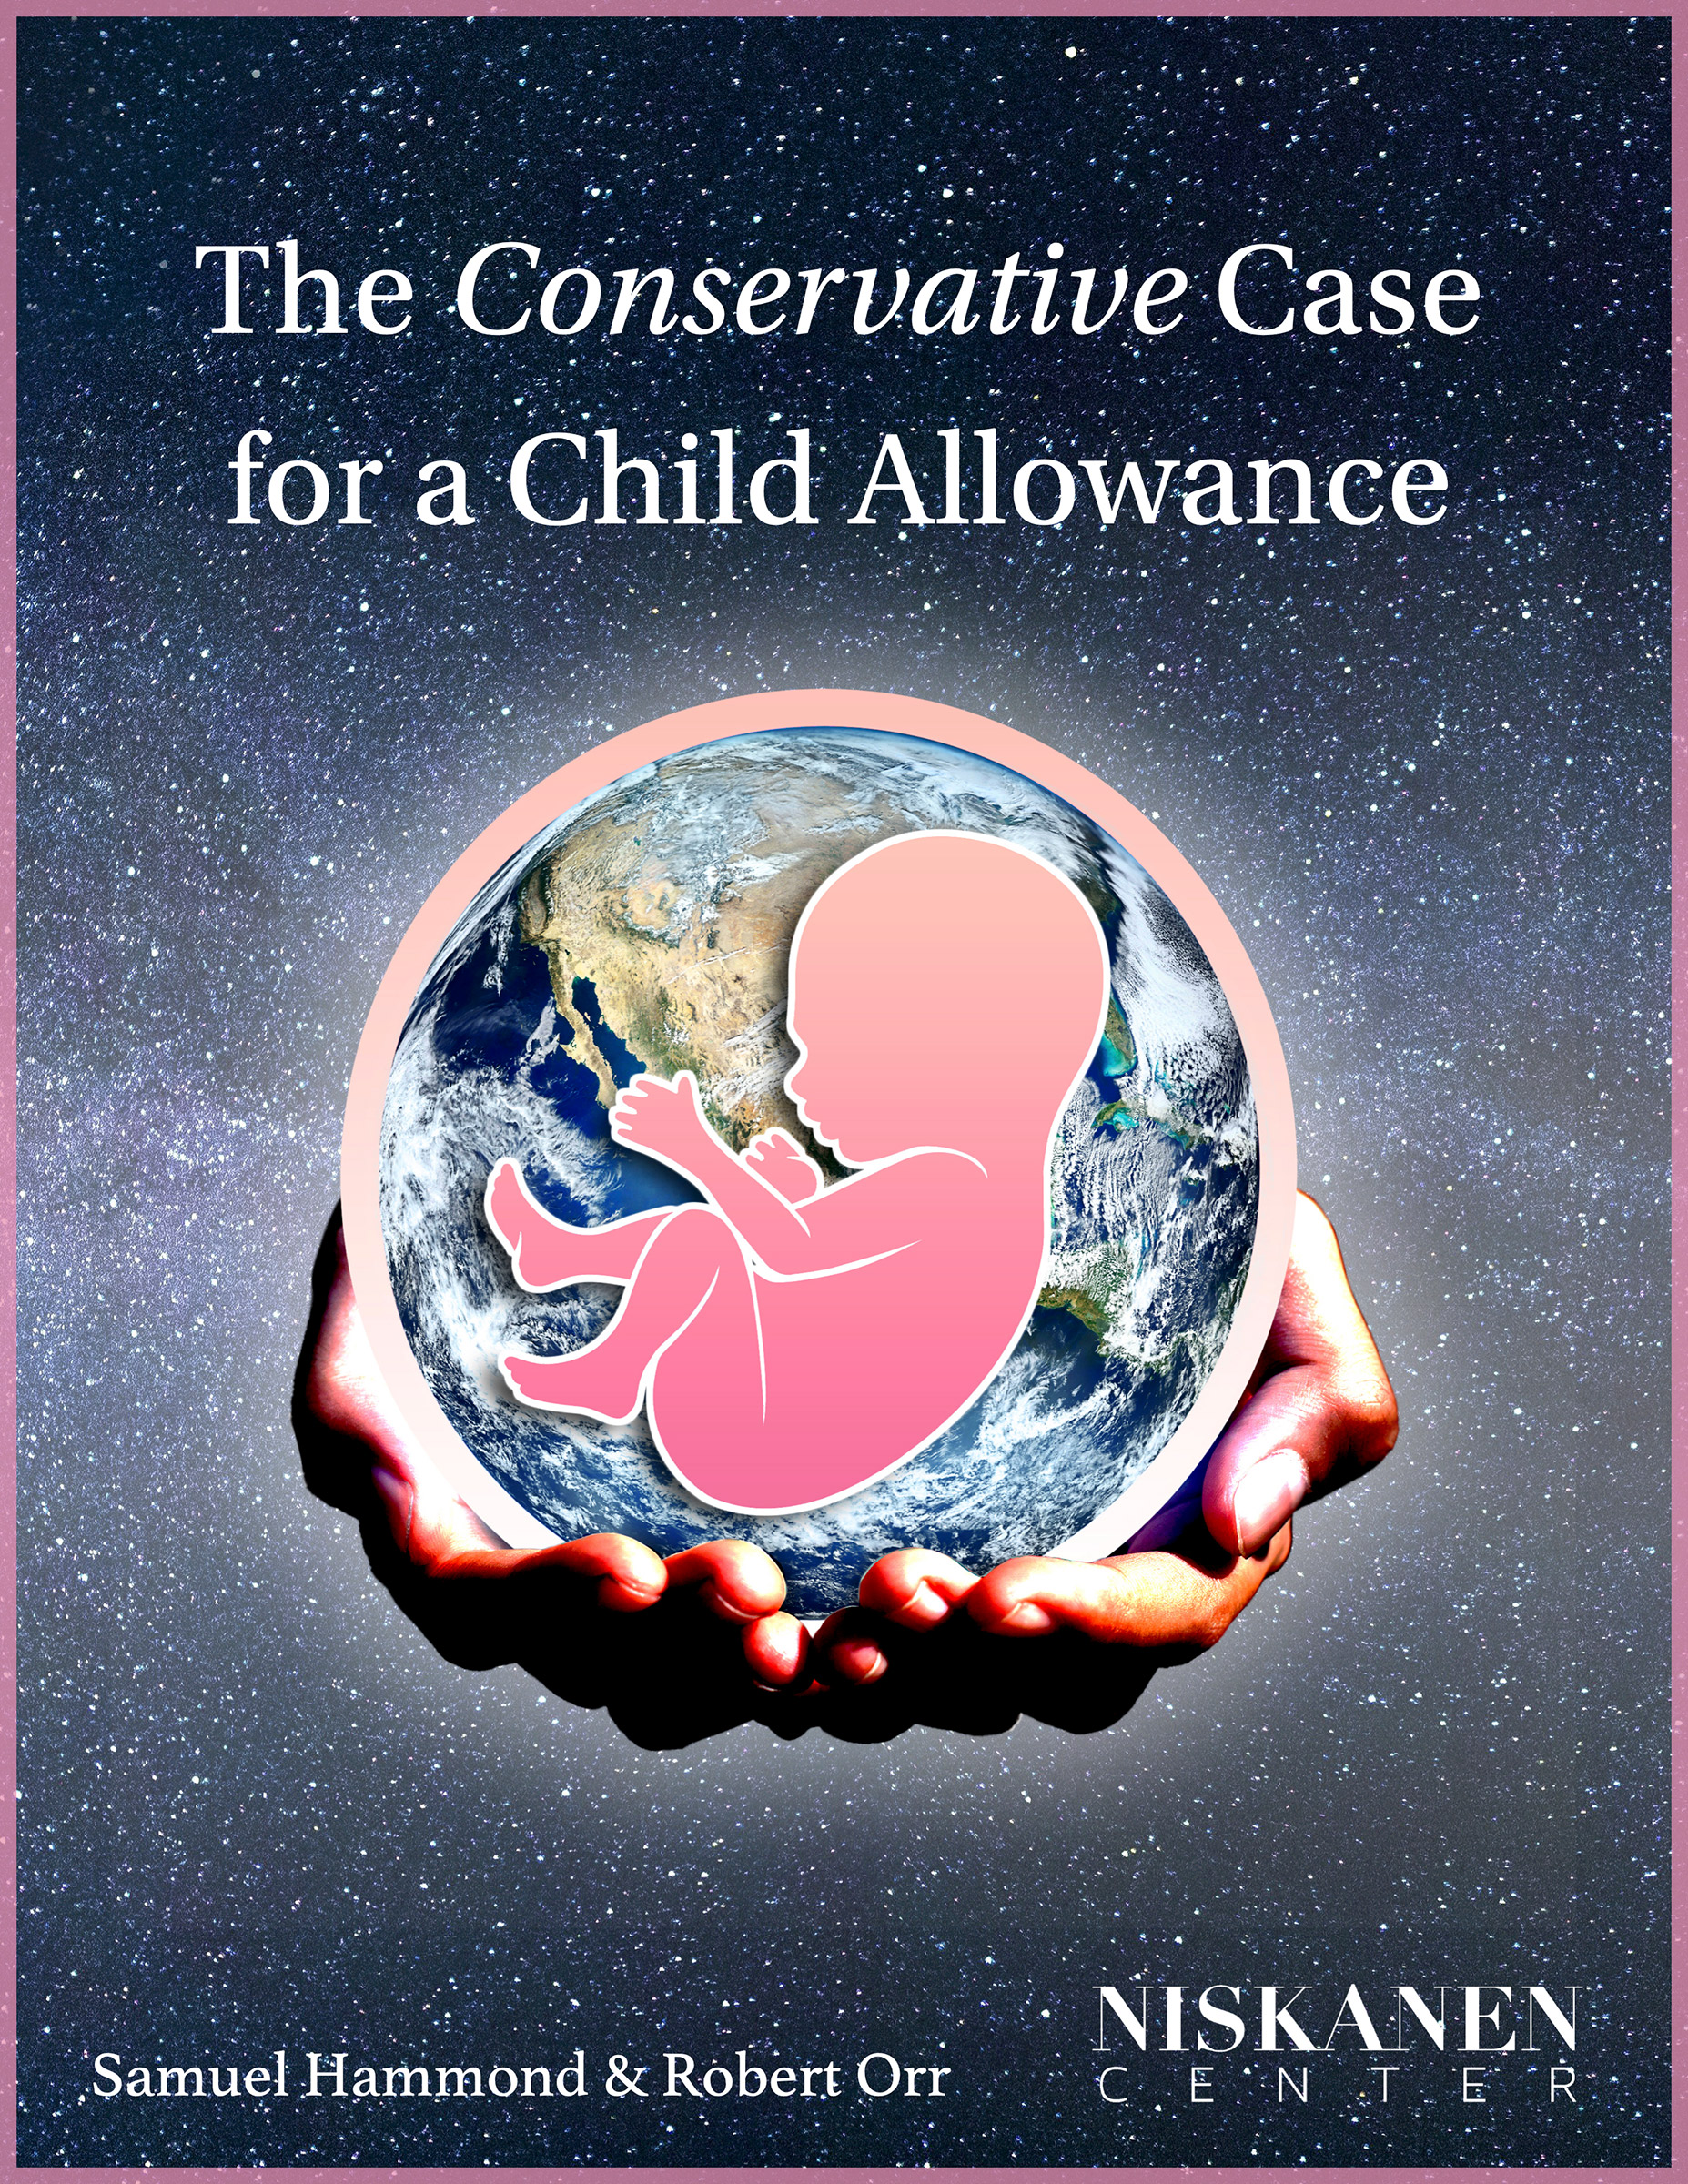 The aforementioned pamphlet, titled “The Conservative Case for a Child Allowance.” (The Niskanen Center)